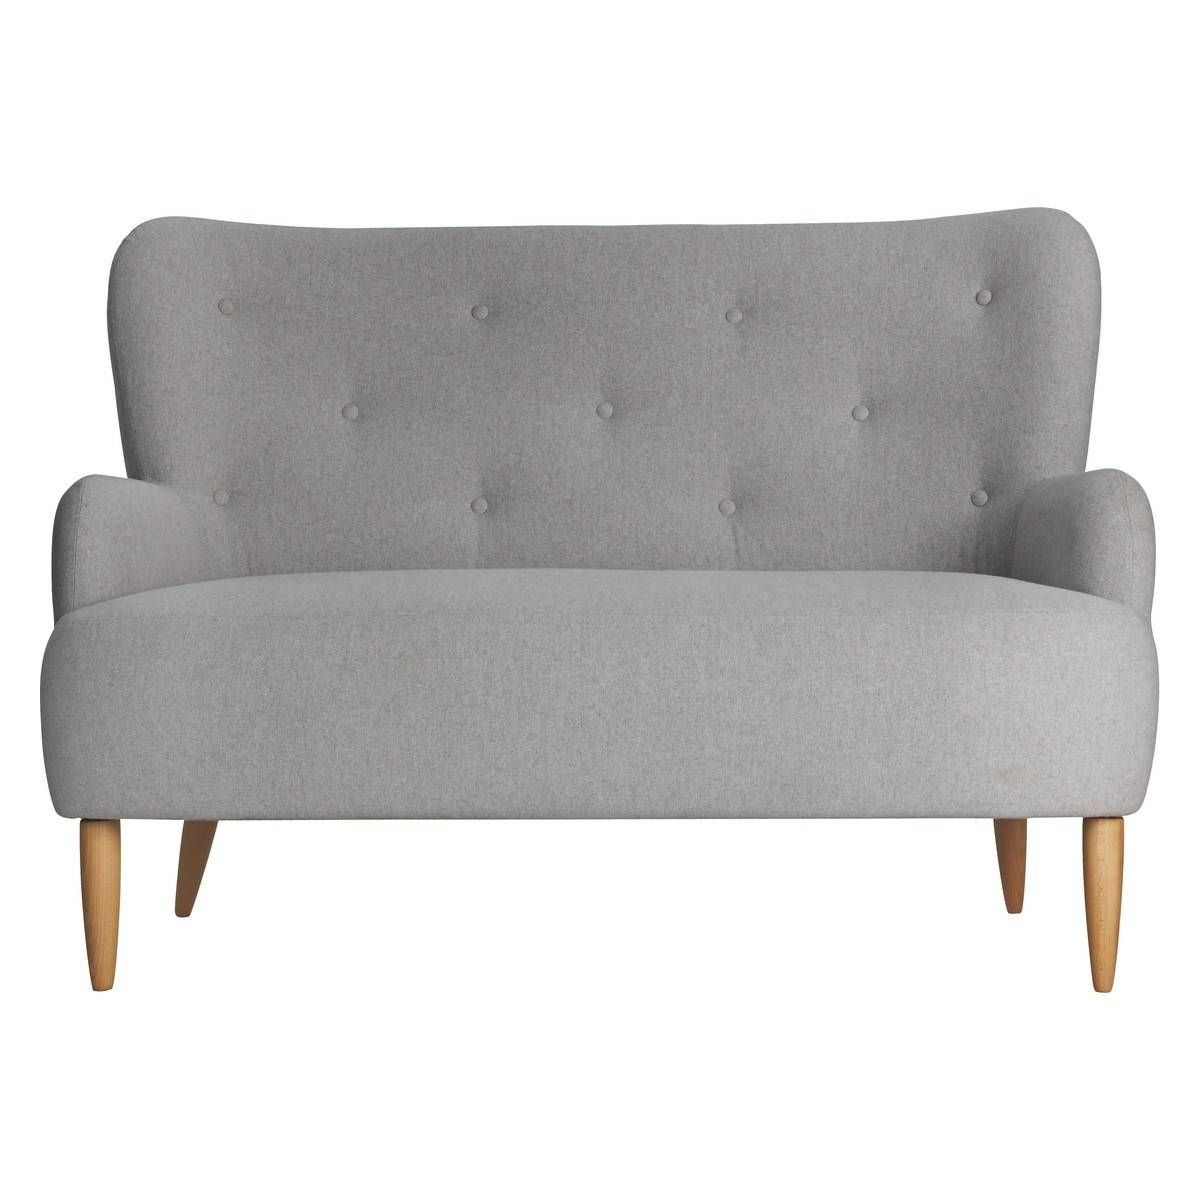 Wilmot Grey Wool Mix 2 Seater Sofa | Buy Now At Habitat Uk Throughout Two Seater Chairs (Photo 8 of 30)